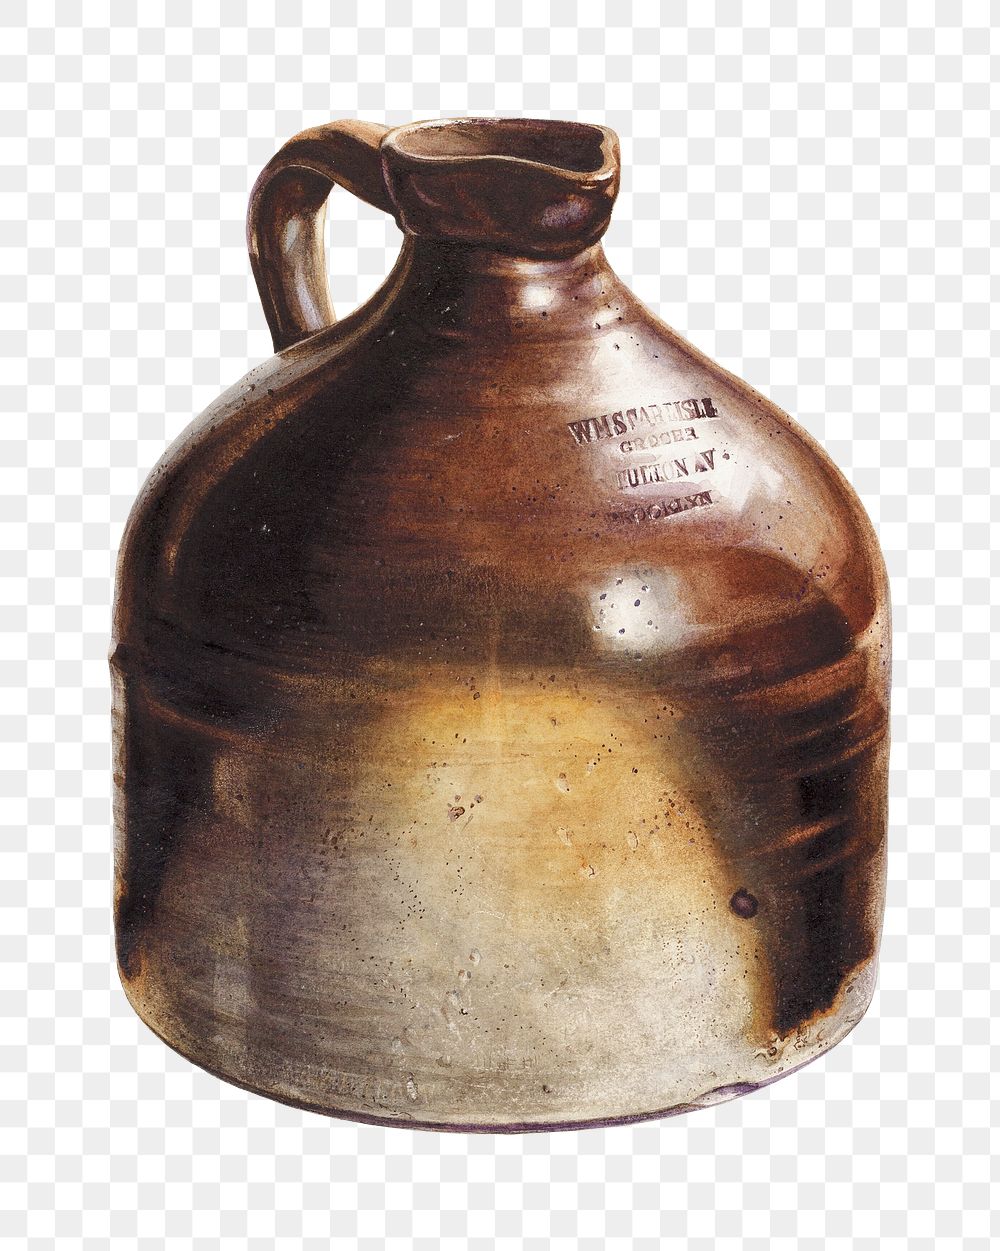 Vintage jug png illustration, remixed from the artwork by Charles Caseau